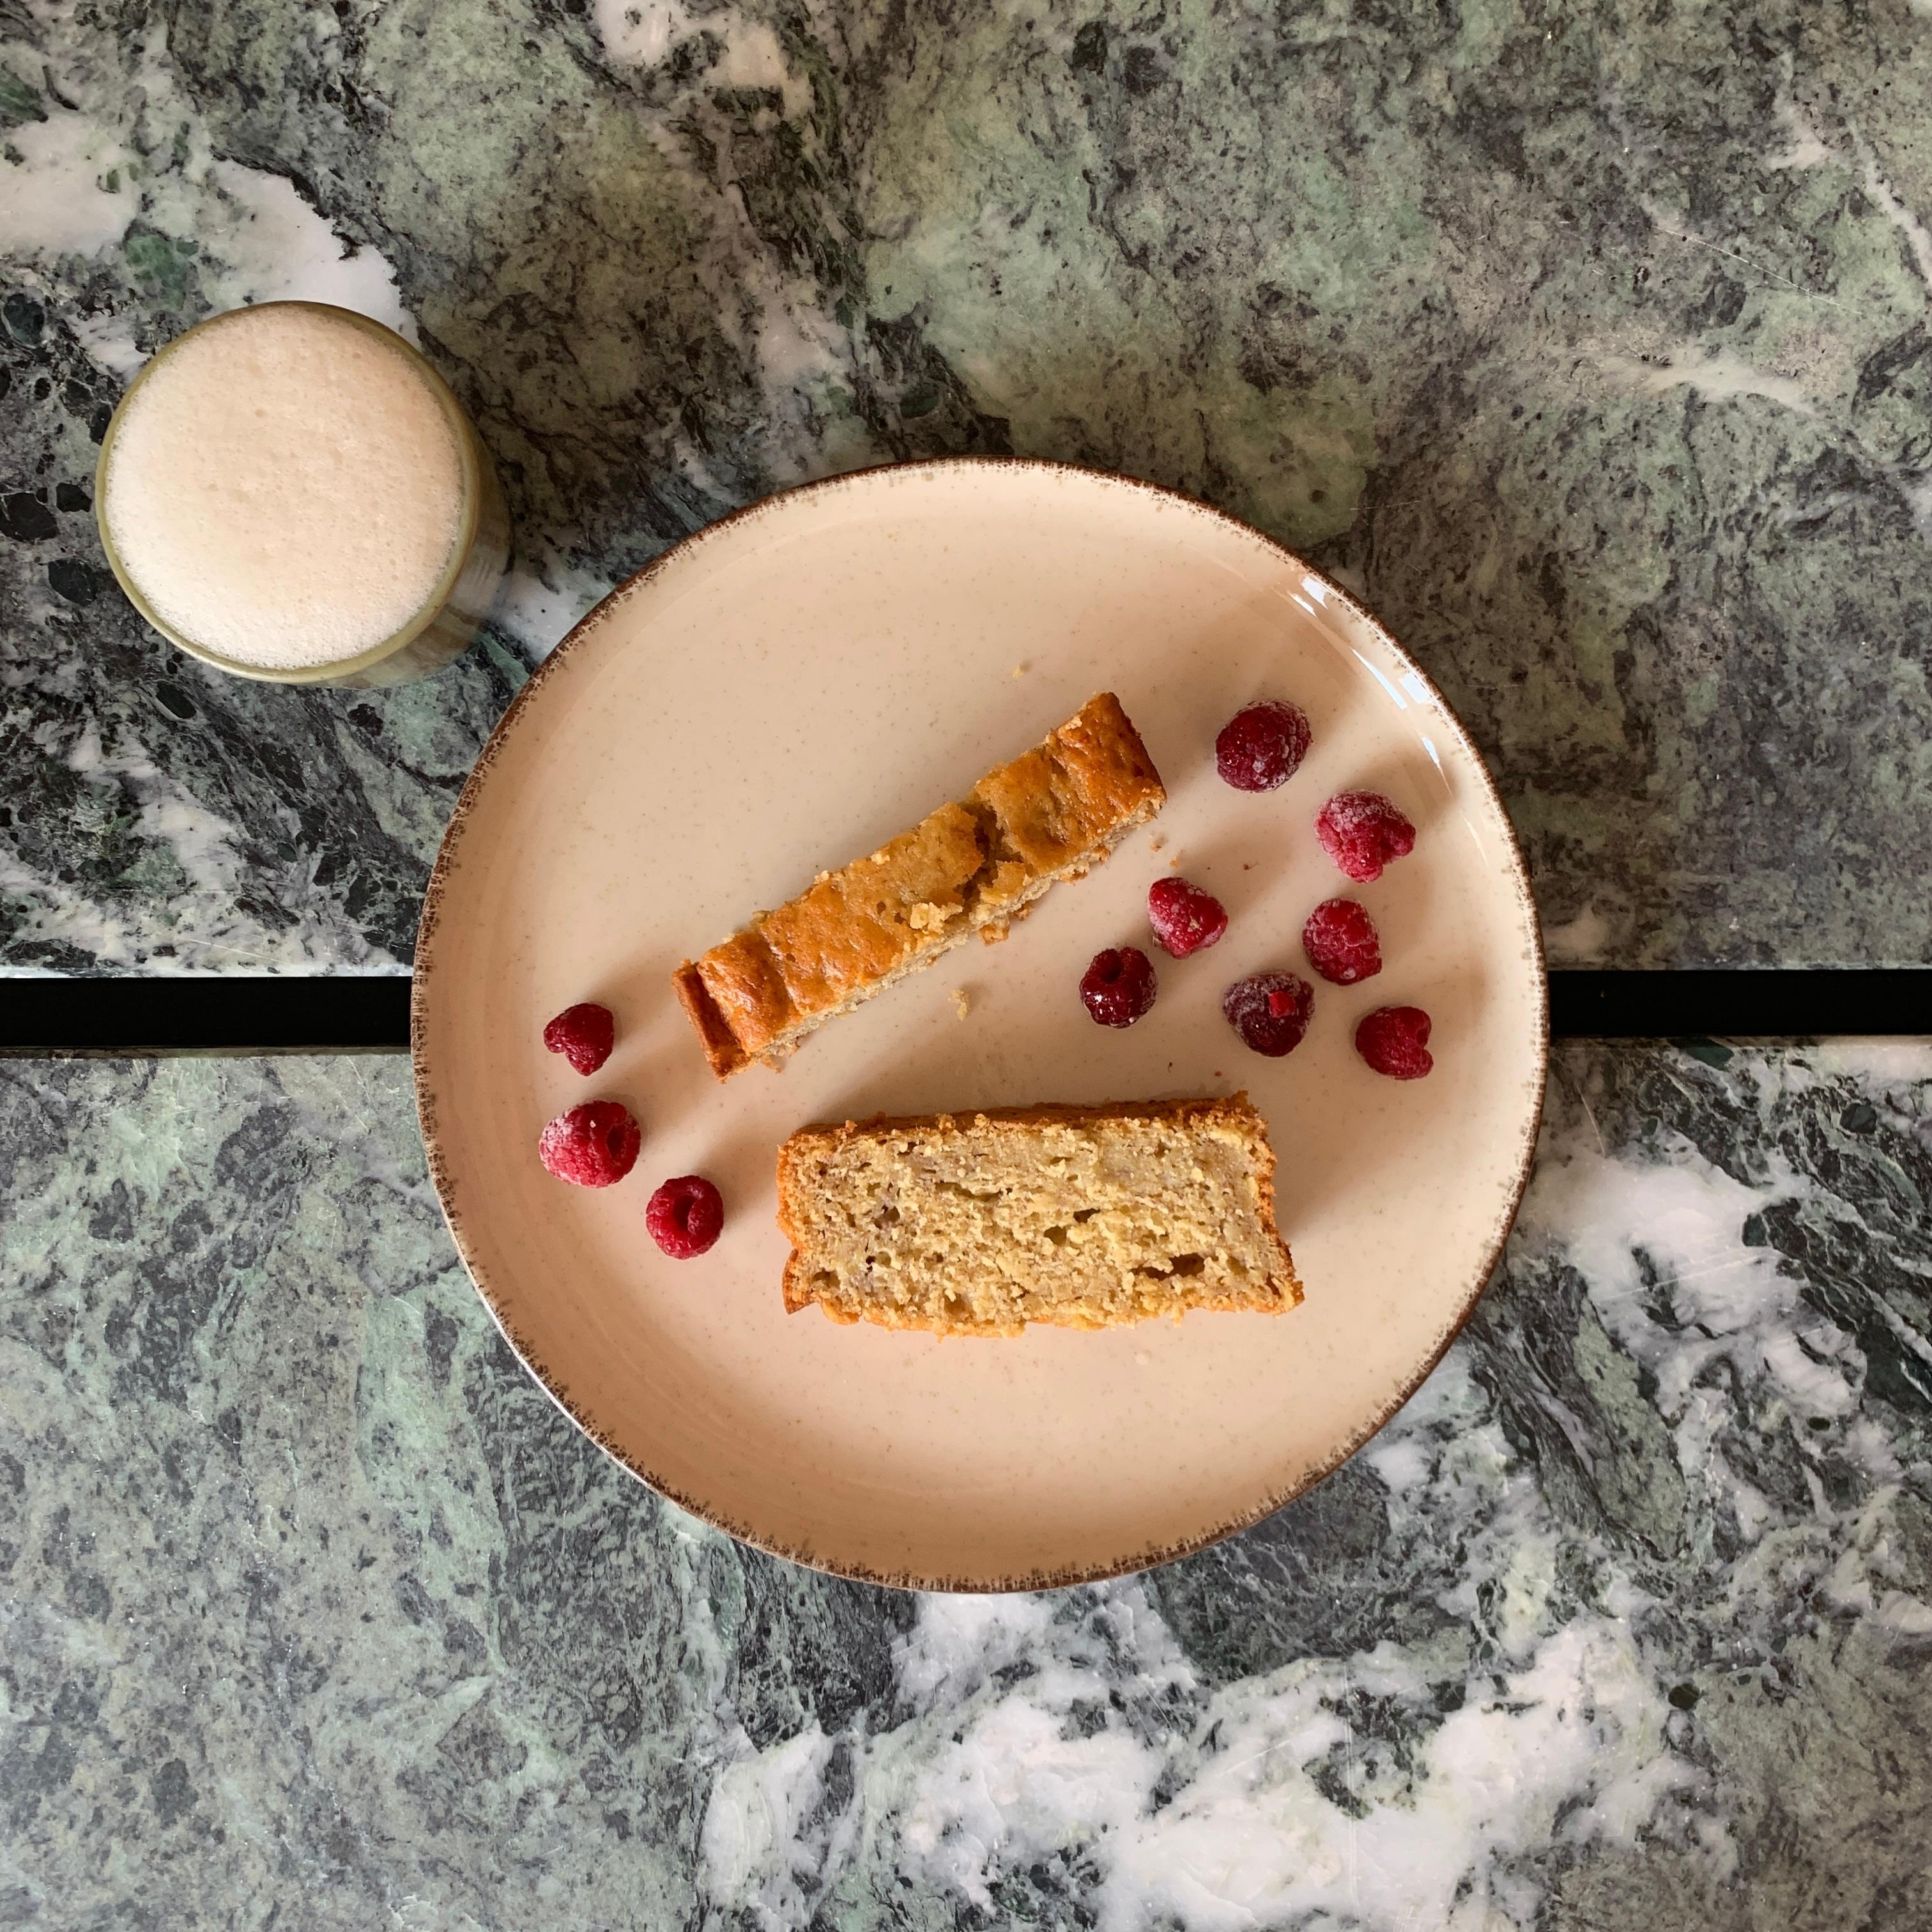 Coffee and cake: a match made in heaven #tabledecor #coffee #cake #marble #esstisch 